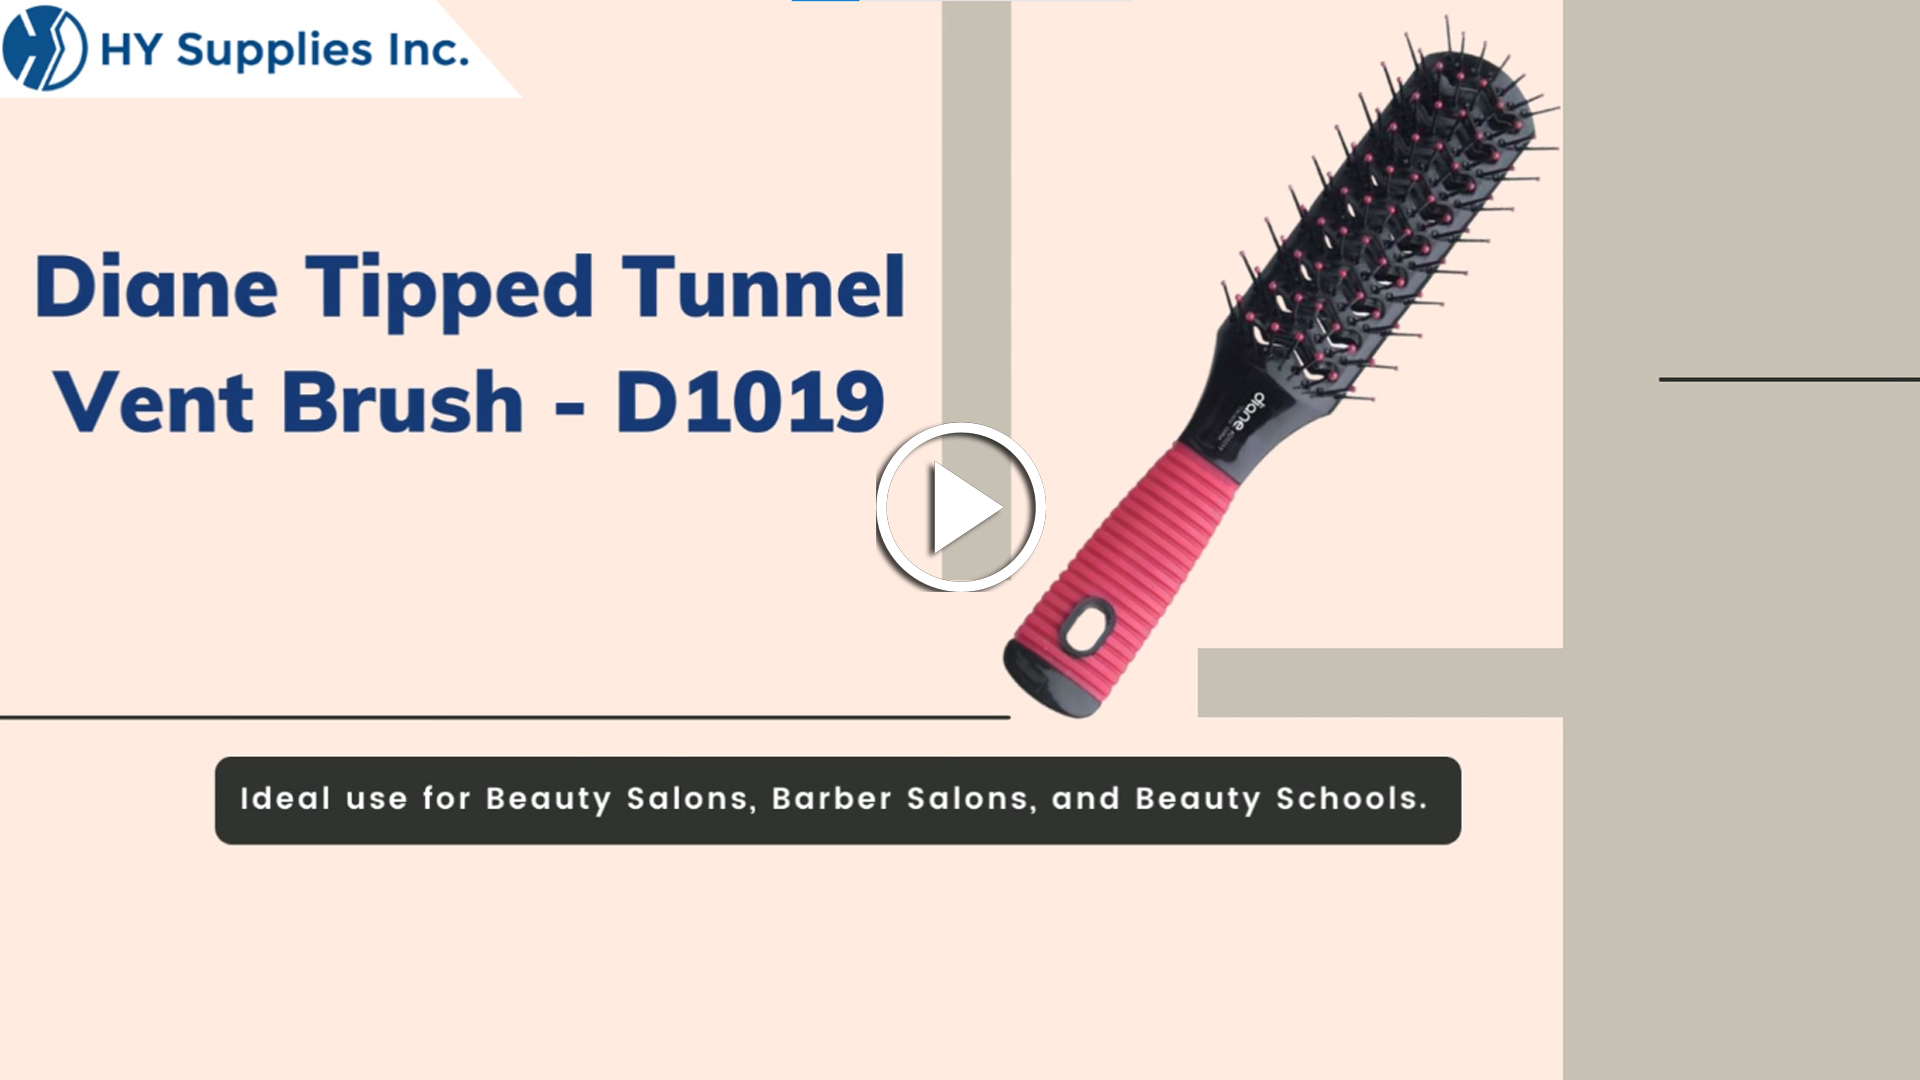 Diane Tipped Tunnel Vent Brush - D1019